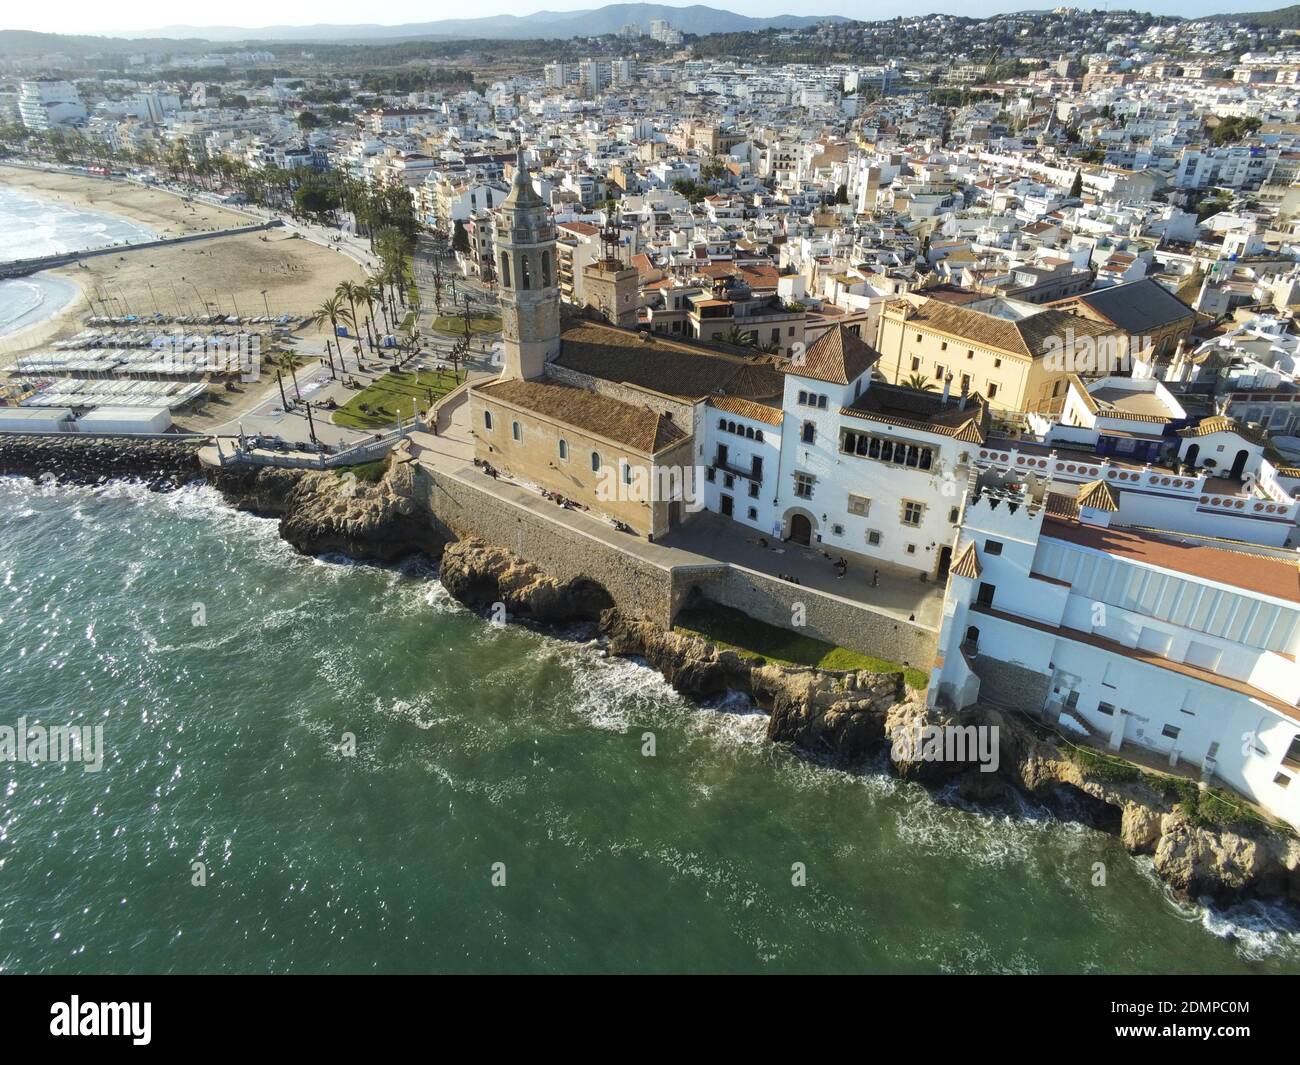 An aerial view of the coastal village of Sitges in Barcelona, Spain with the Church of Sant Bartomeu & Santa Tecla in view Stock Photo